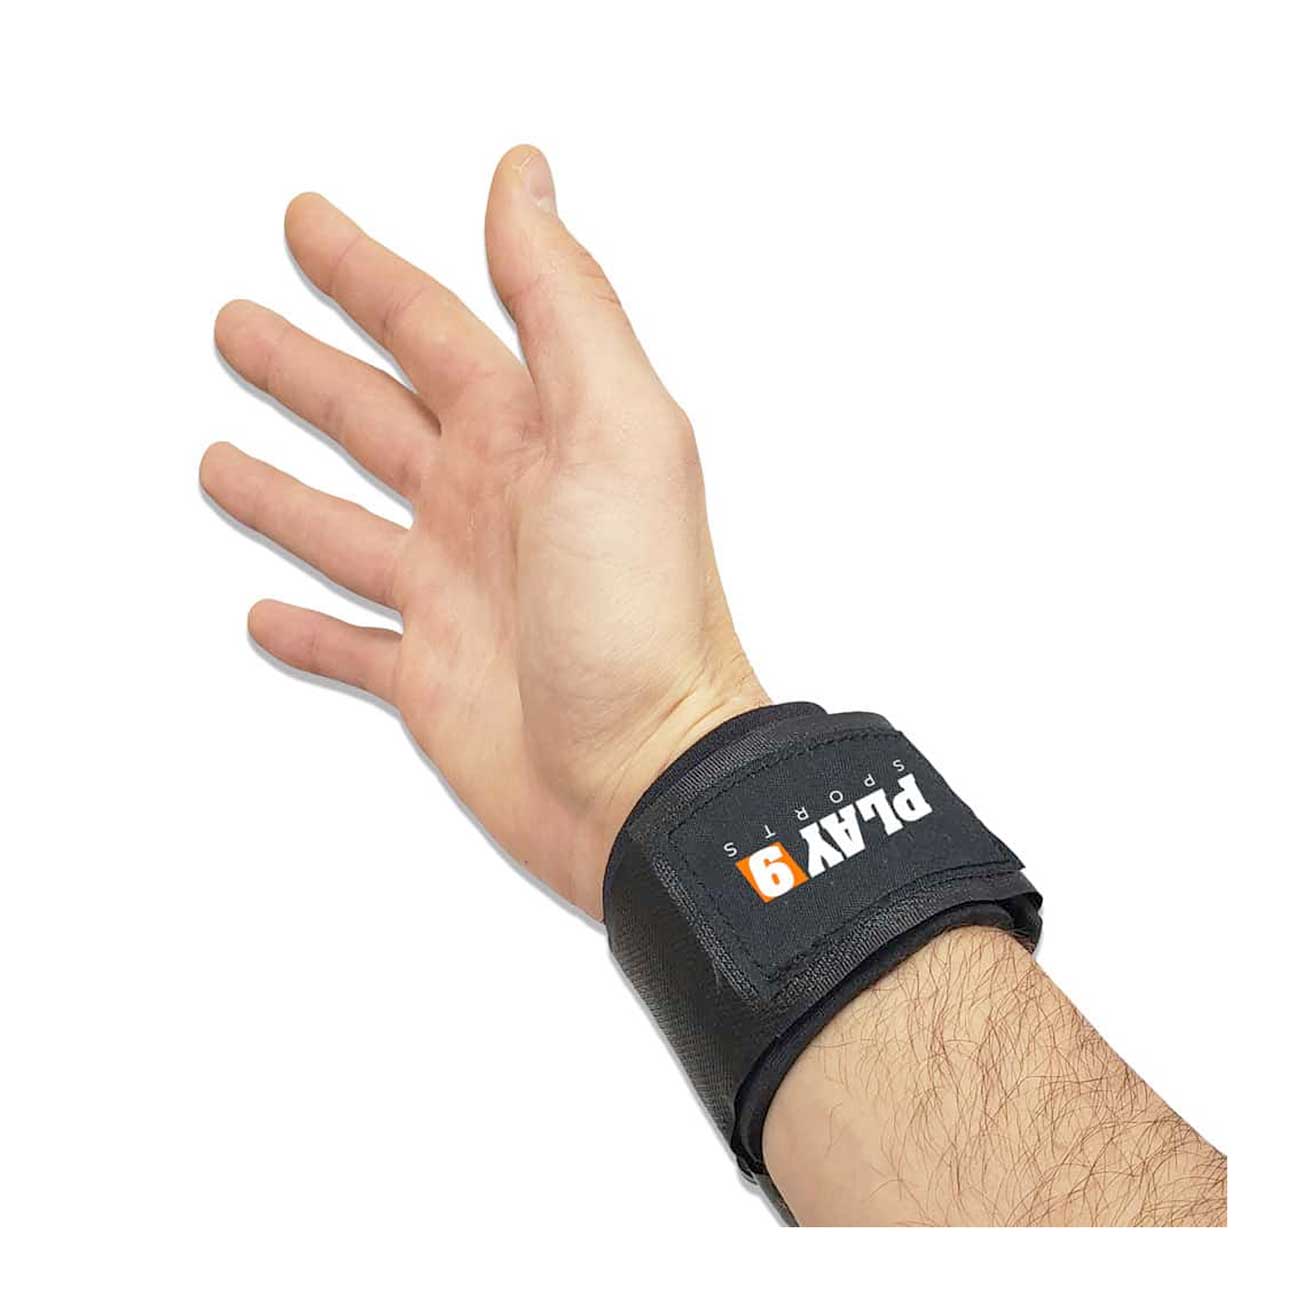 Play 9 Arm Bands - Adult